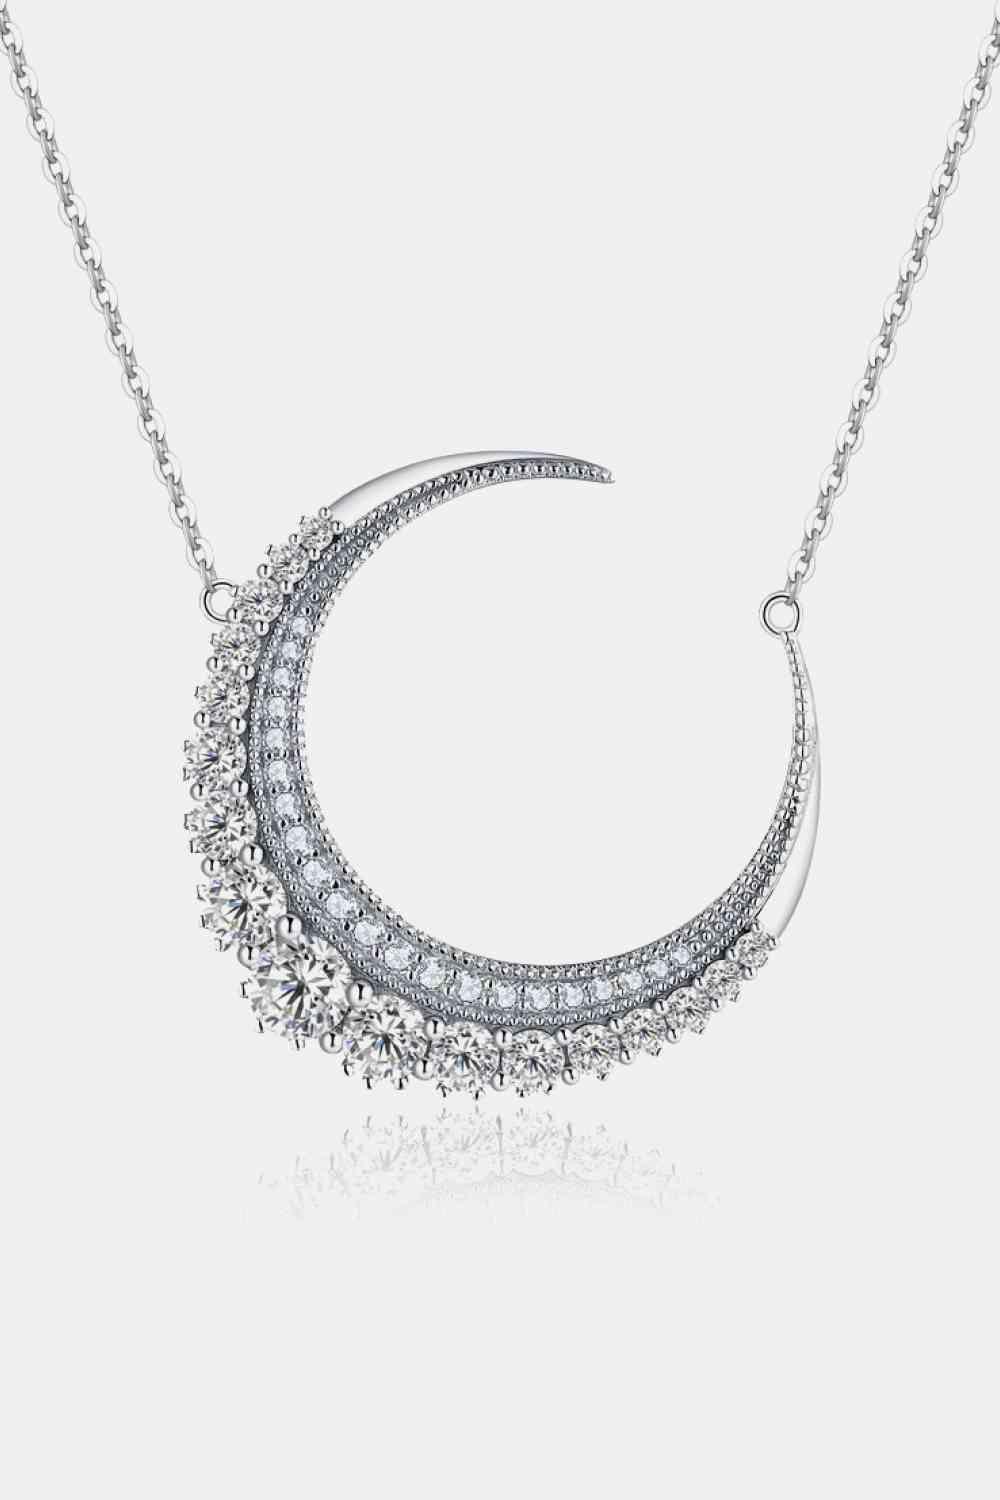 a necklace with a crescent design on it